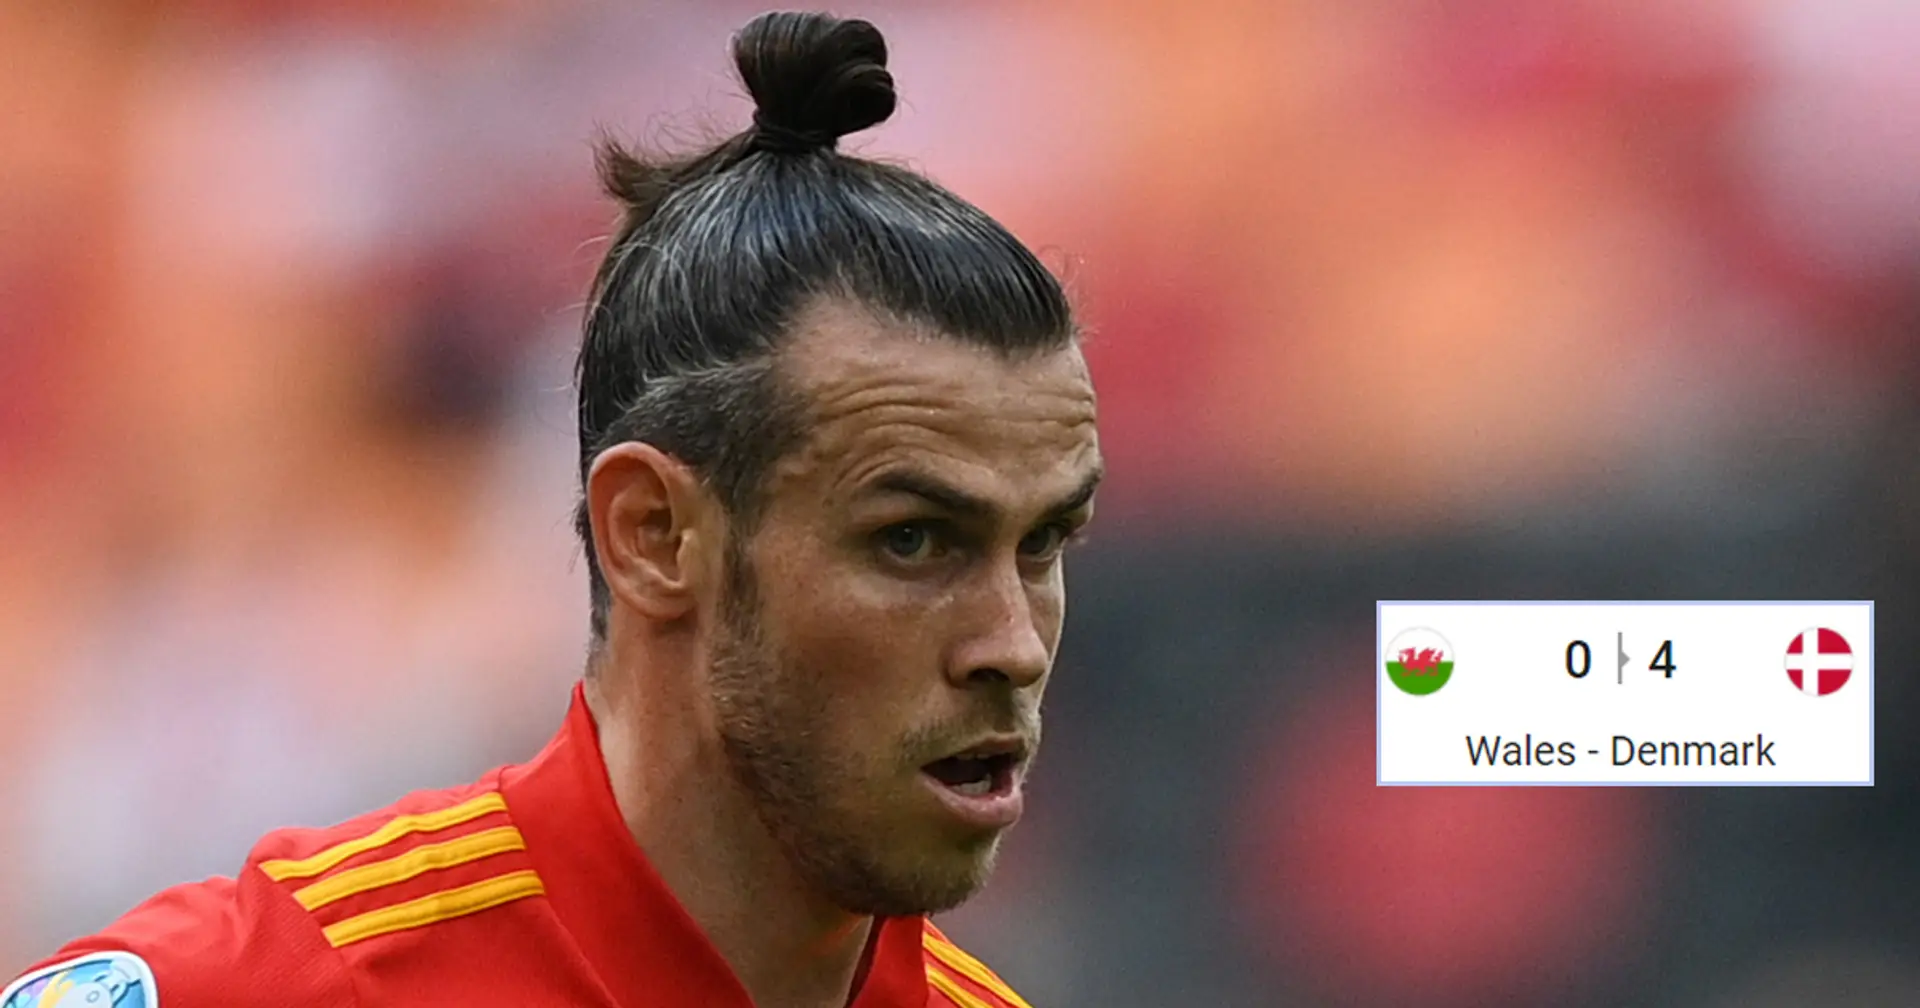 Bale becomes first Madrid player to be eliminated from Euro 2020 as Denmark destroy Wales